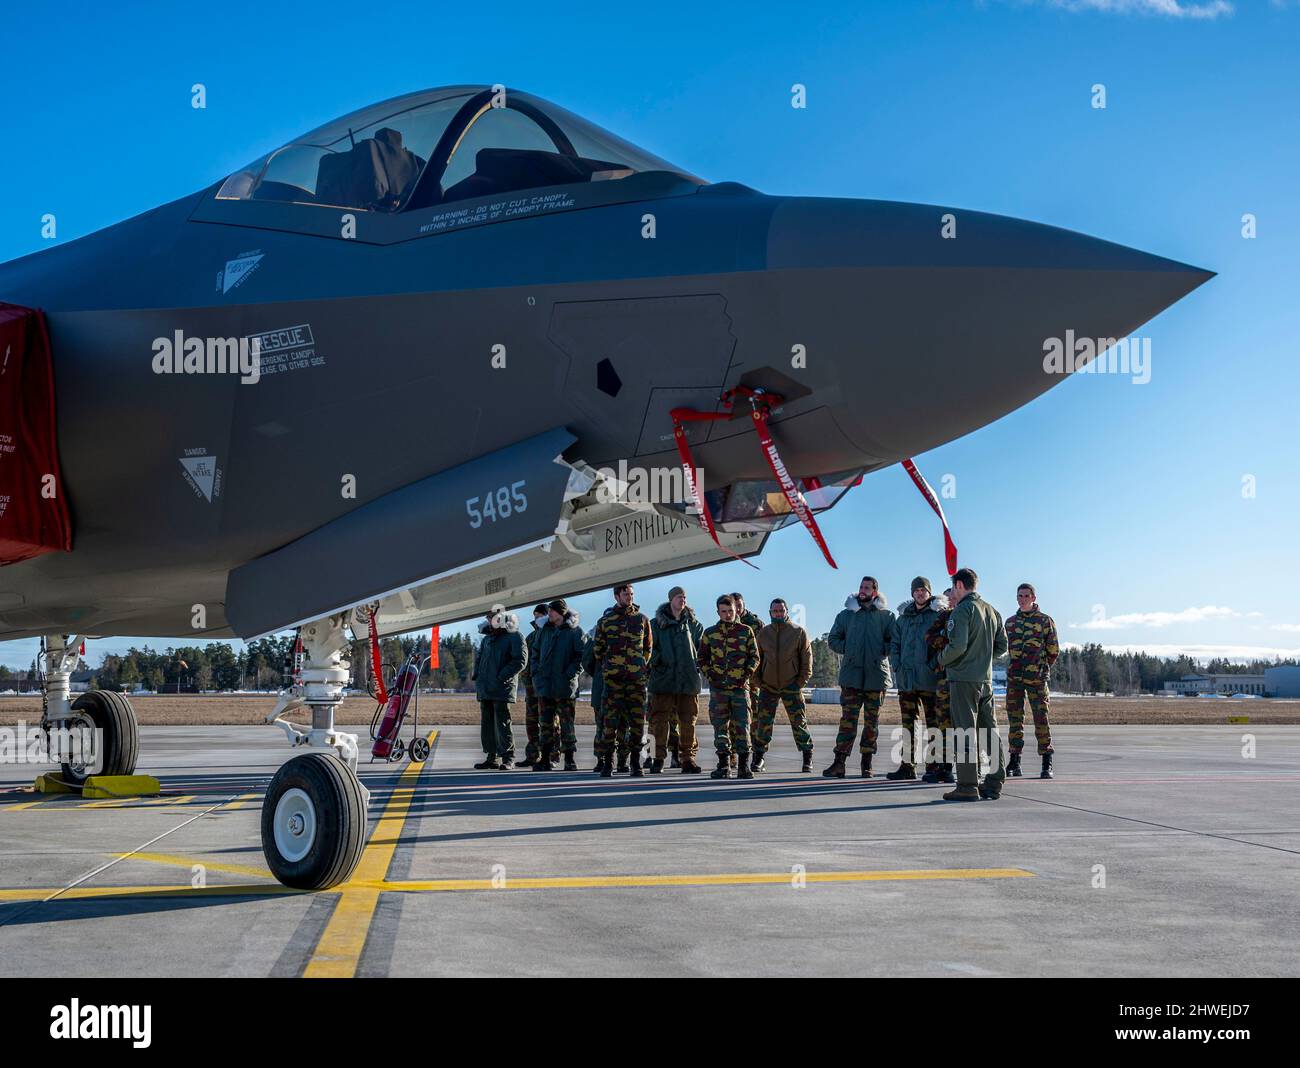 A U.S. Air Force pilot assigned to the 48th Fighter Wing from Royal Air Force Lakenheath gives a tour of an F-35 Lightning II aircraft for members of the Belgian air force at Ämari Air Base, Estonia, March 3, 2022. Members of the 48th FW and three F-35s forward deployed to Ämari AB to support NATO’s collective defense and enhanced Air Policing mission. U.S. forces in Europe live, train and operate with allies and partners from strategic locations across Europe. These locations are critical for a timely and coordinated response during peacetime and crisis. (U.S. Air Force photo by Staff Sgt. Me Stock Photo